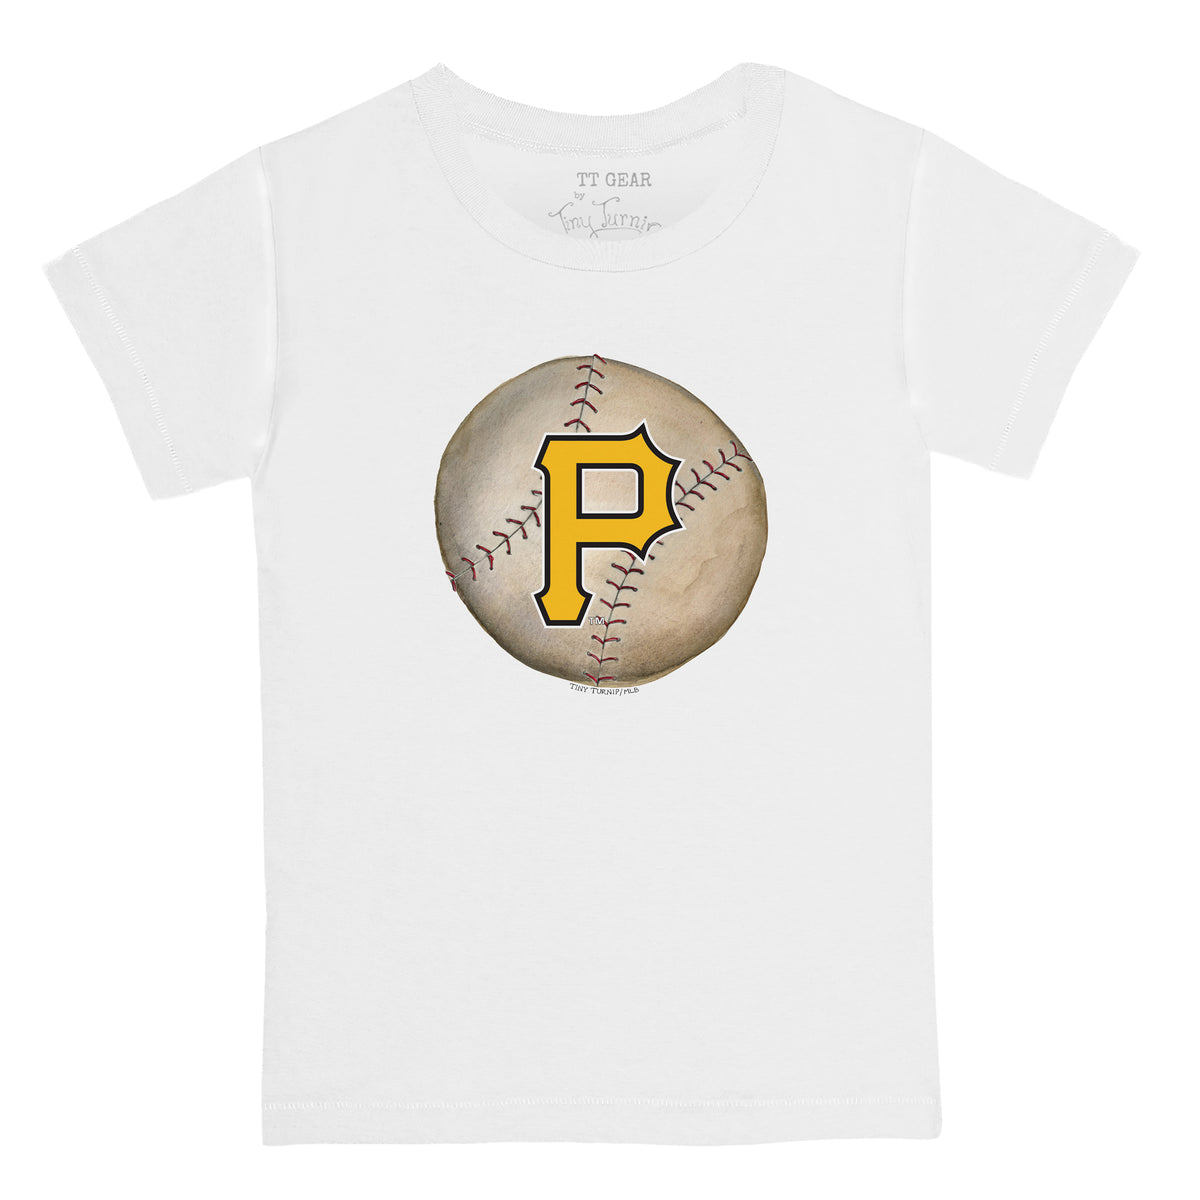 Kids Pittsburgh Pirates Gifts & Gear, Youth Pirates Apparel